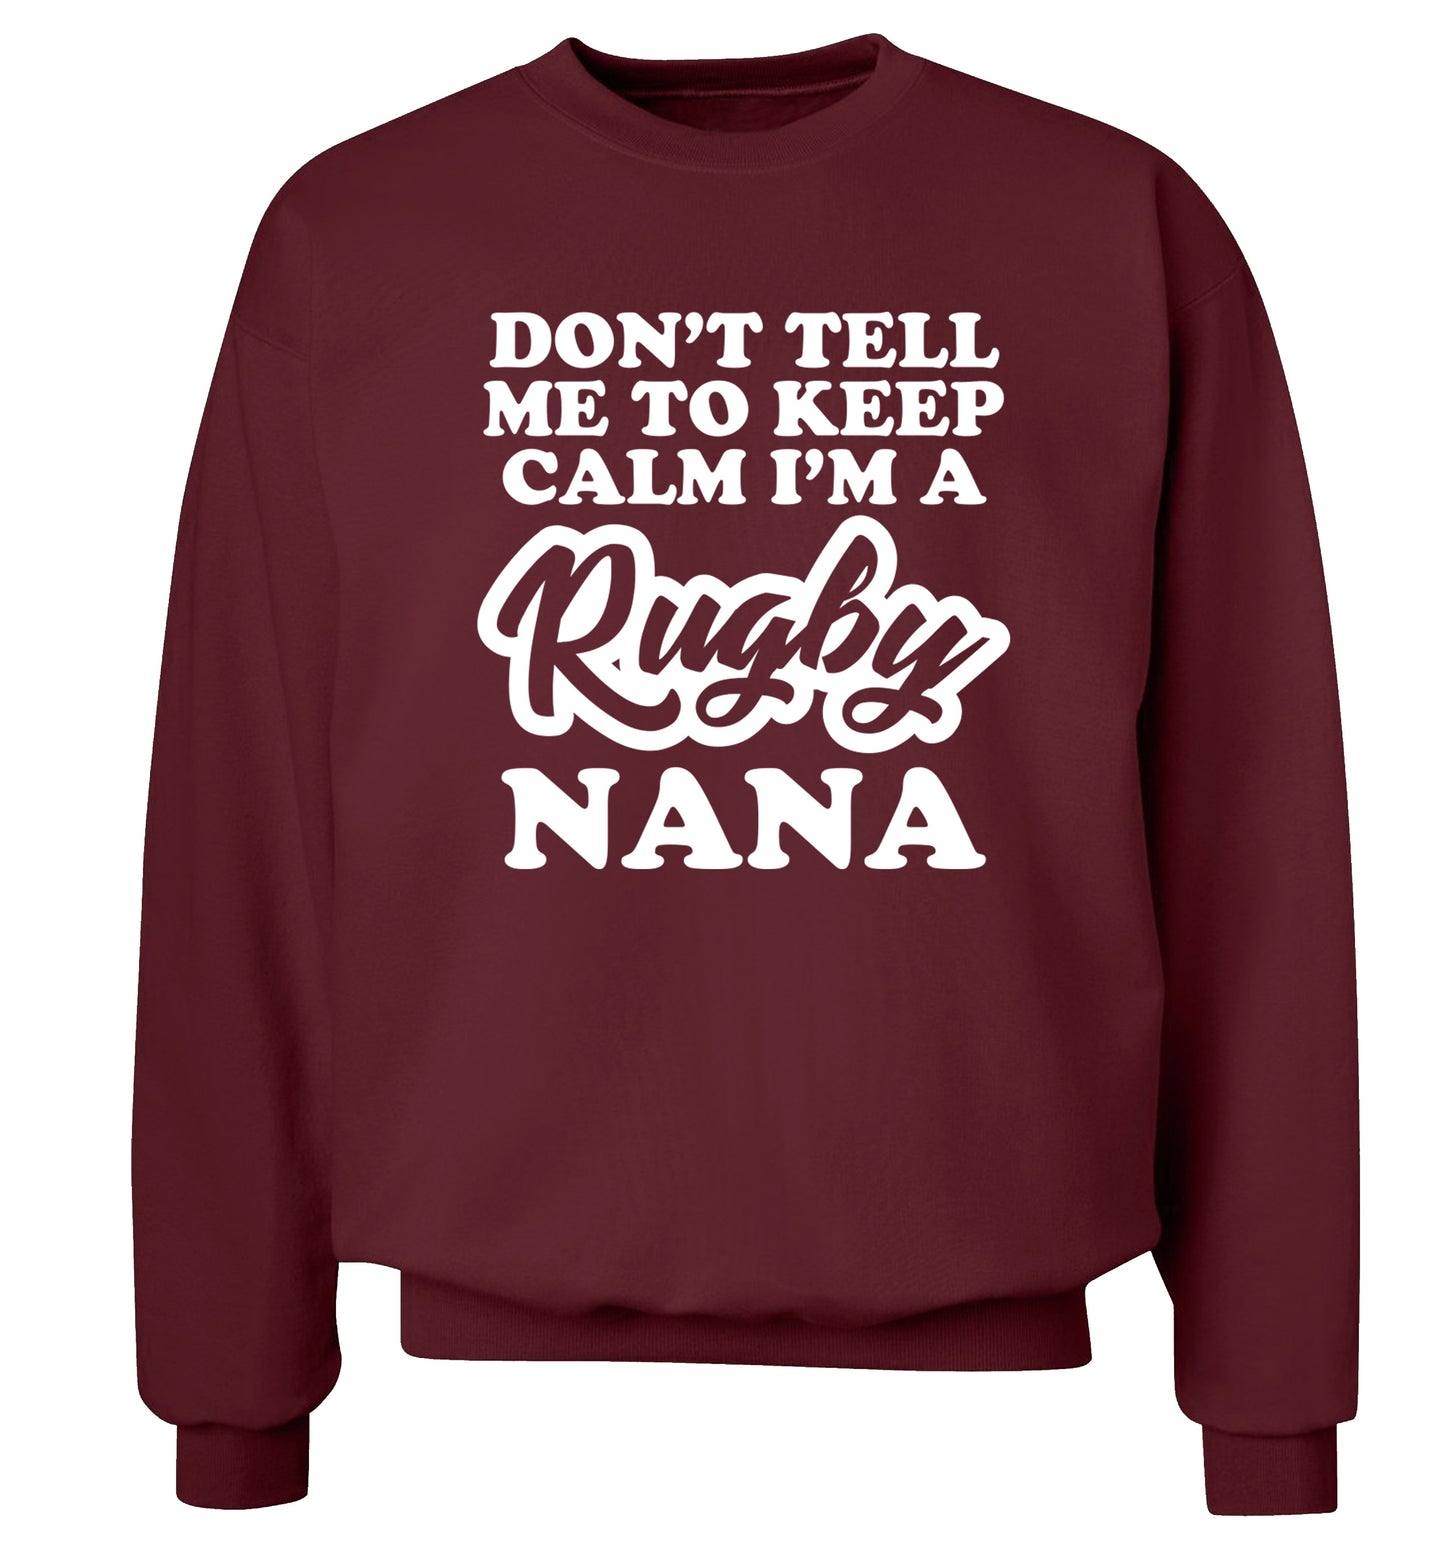 Don't tell me to keep calm I'm a rugby nana Adult's unisex maroon Sweater 2XL